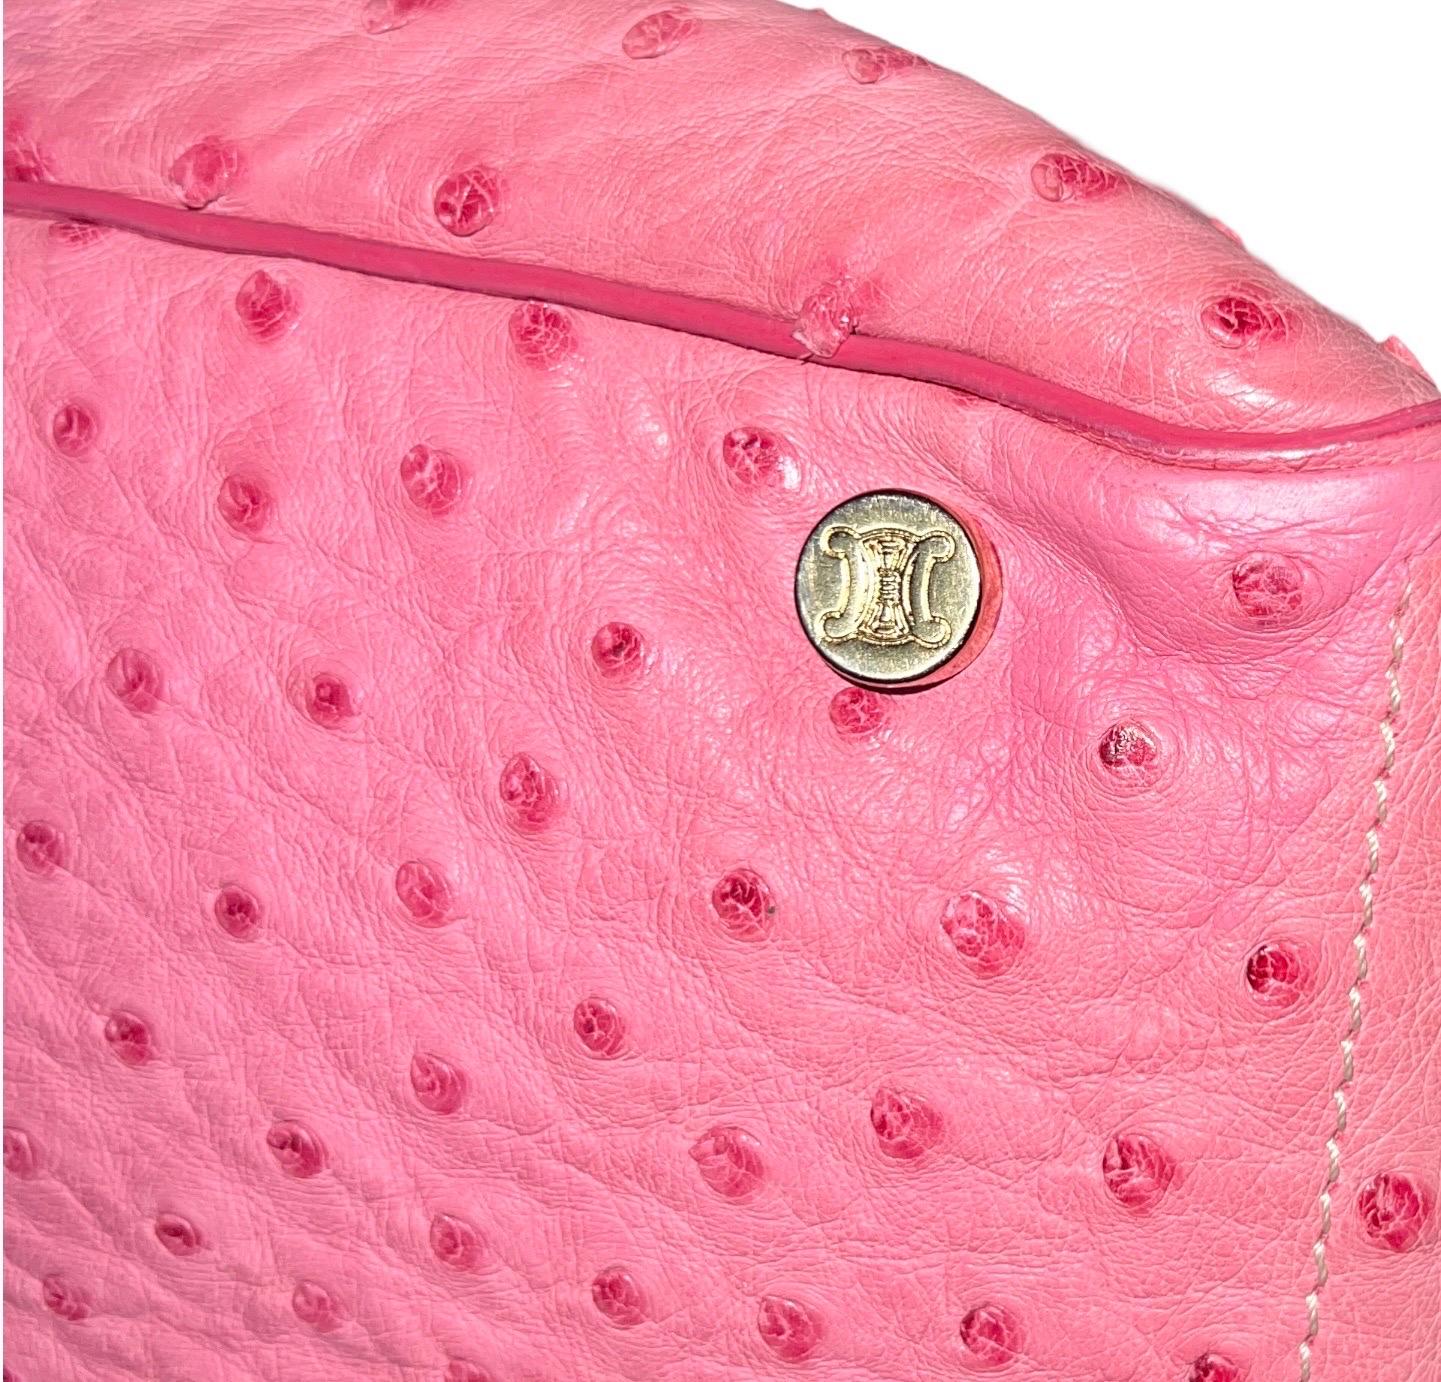 CELINE Rare Exotic Pink „Barbie“ Ostrich Skin Boogie Bag by Michael Kors 2000s For Sale 3